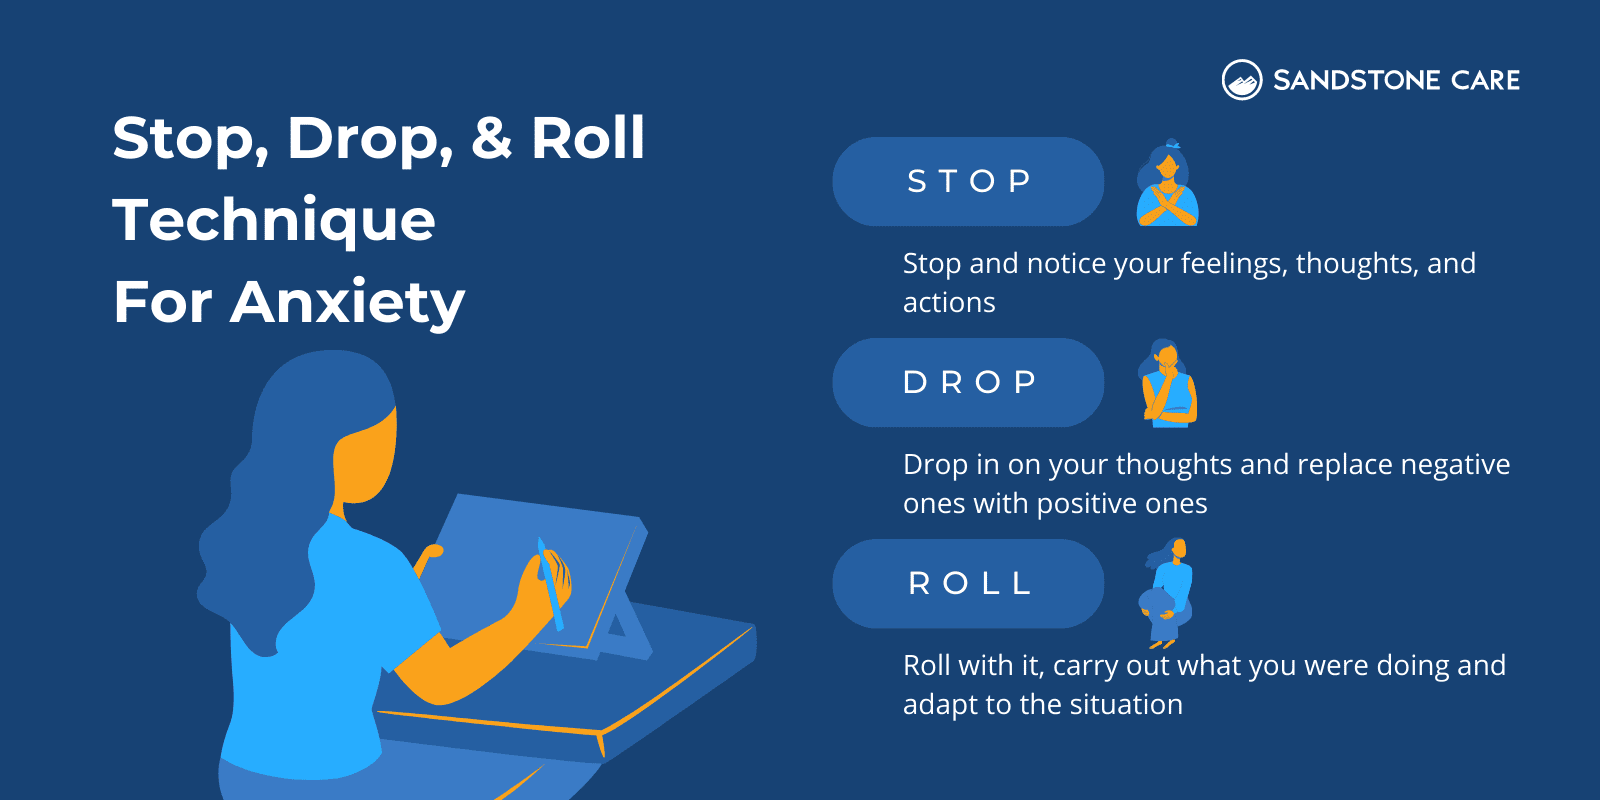 A coping skill "Stop, Drop, And Roll Technique" For Anxiety illustrated with each step with relevant digital illustrations